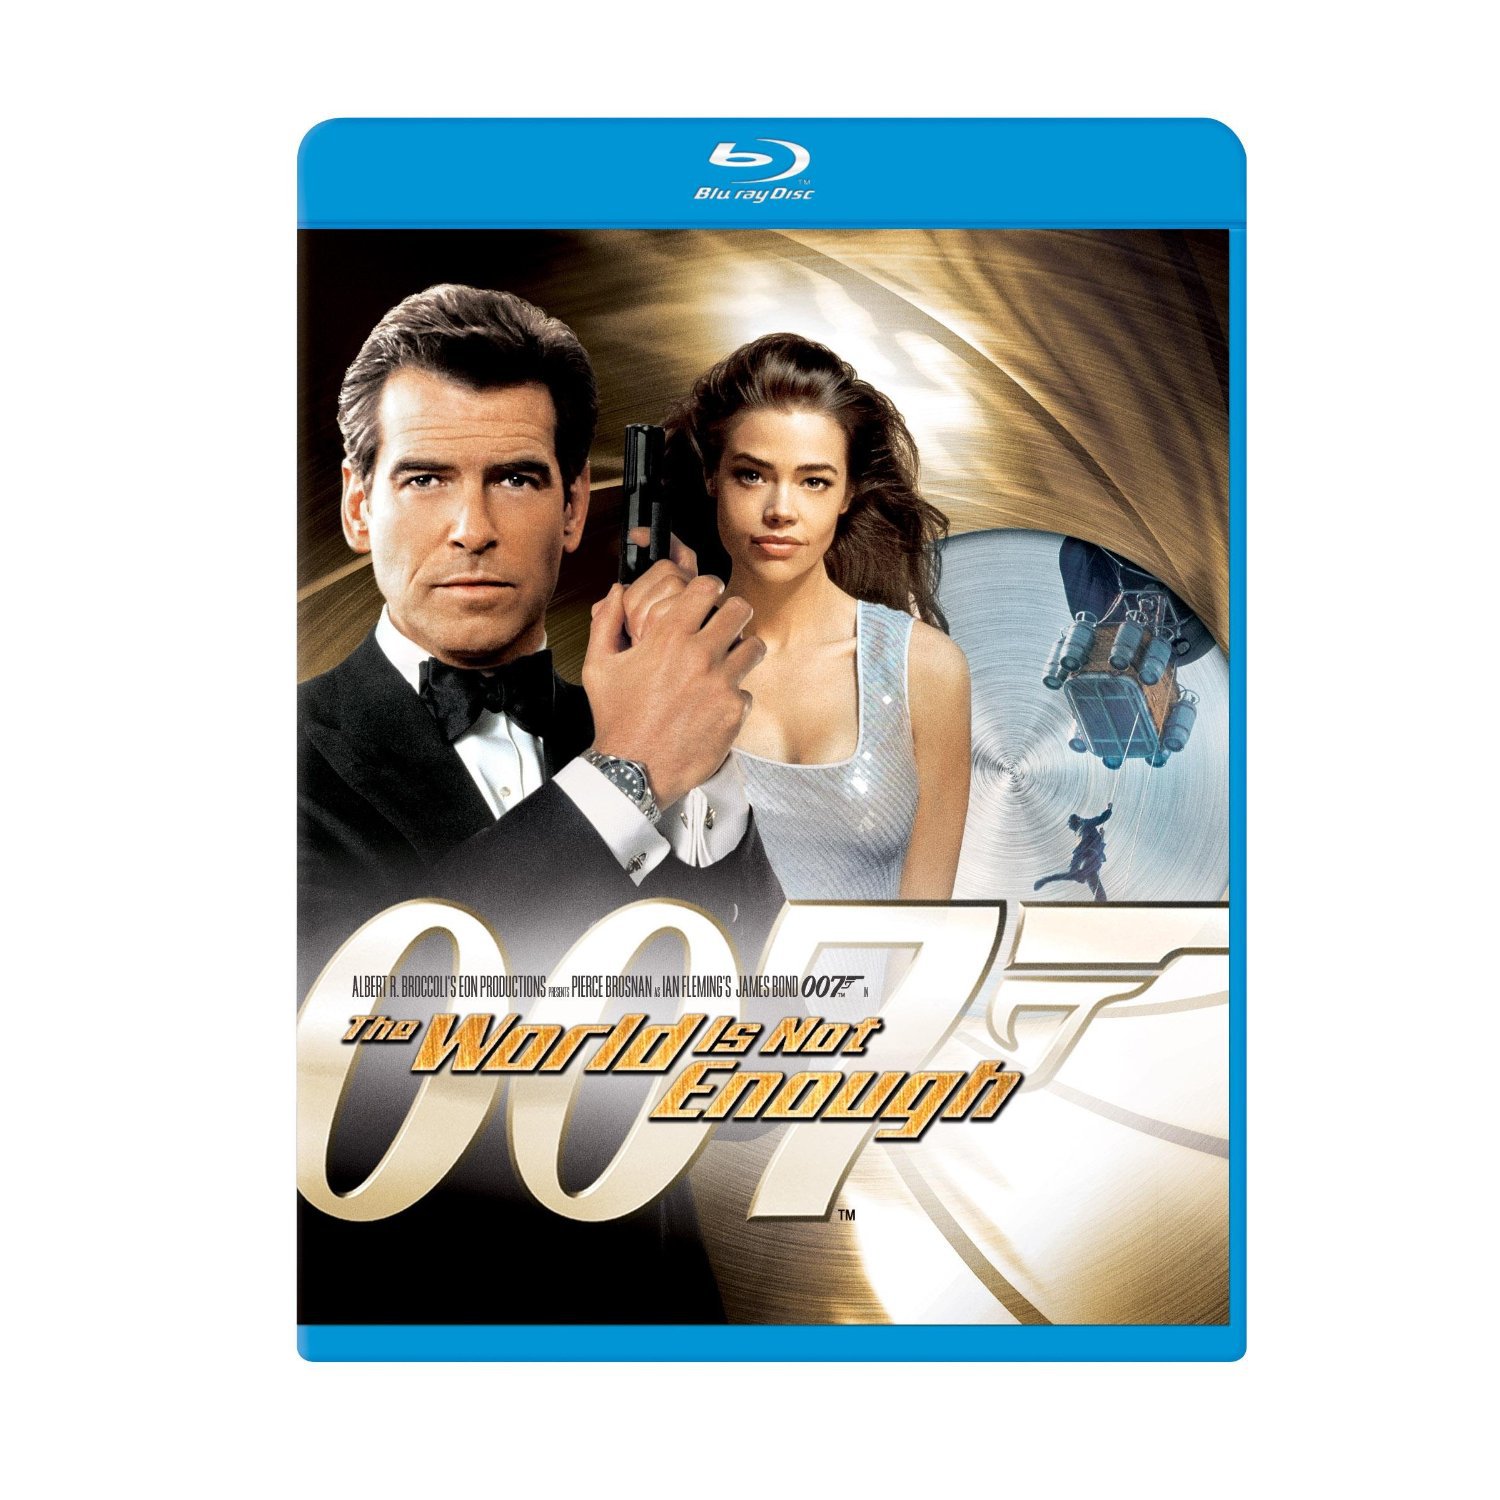 007 The World is Not Enough